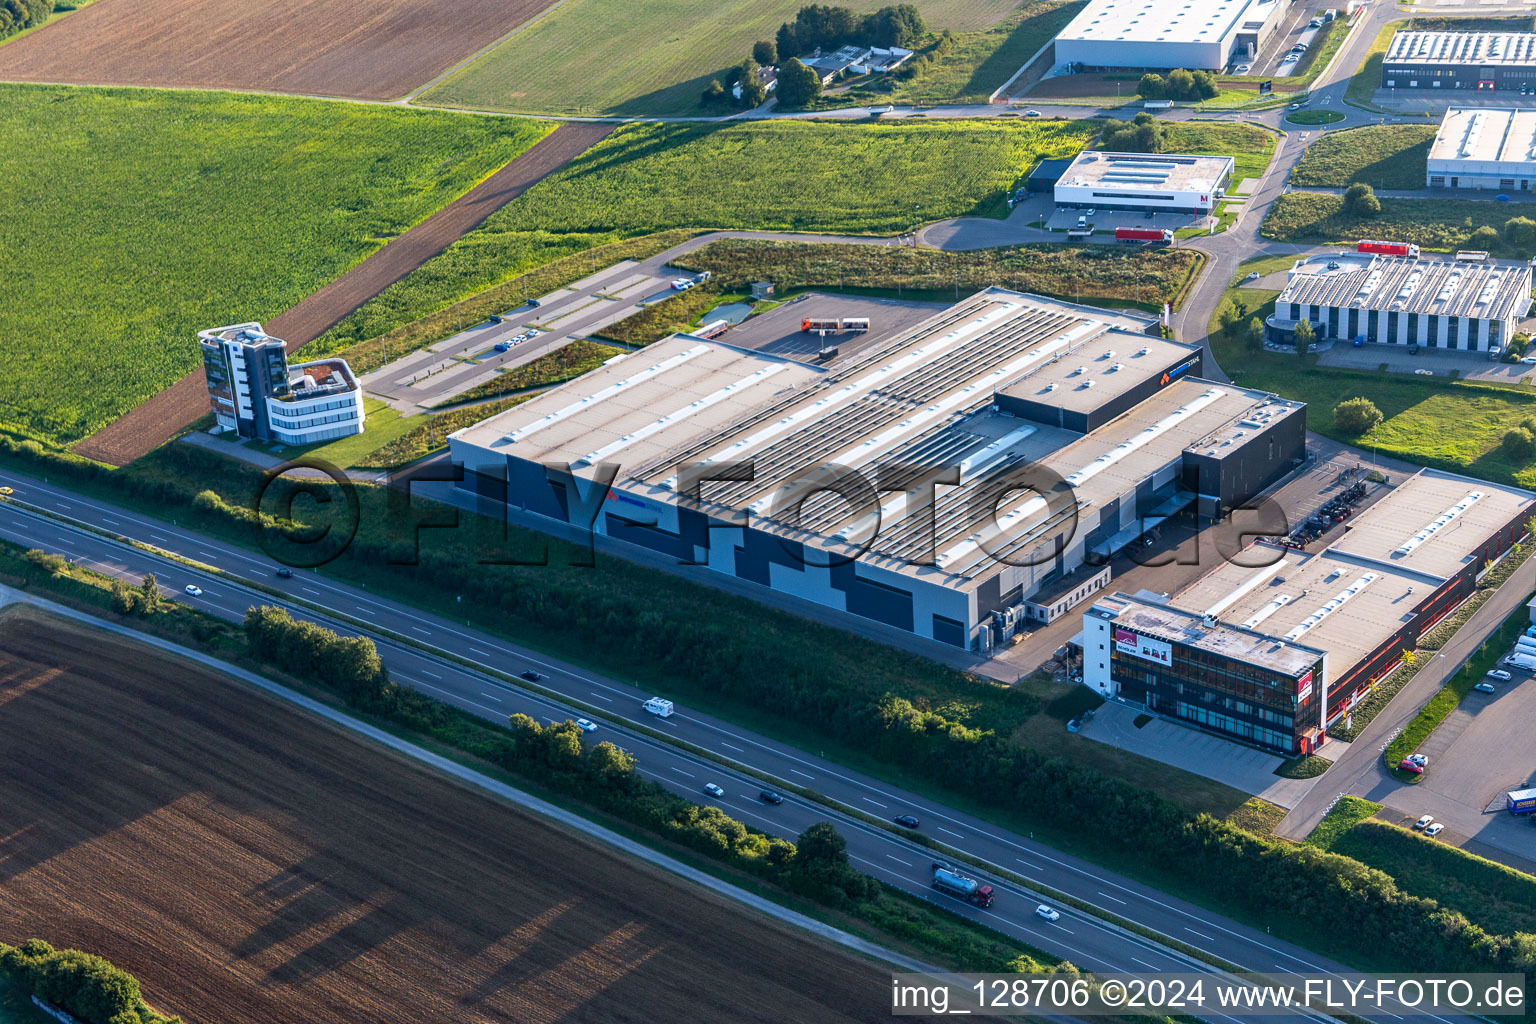 Company grounds and facilities of Schoeler Foerdertechnik AG, Bucher Stahlhandel GmbH undB.A.H. Personaldienste GmbH in Zimmern ob Rottweil in the state Baden-Wuerttemberg, Germany